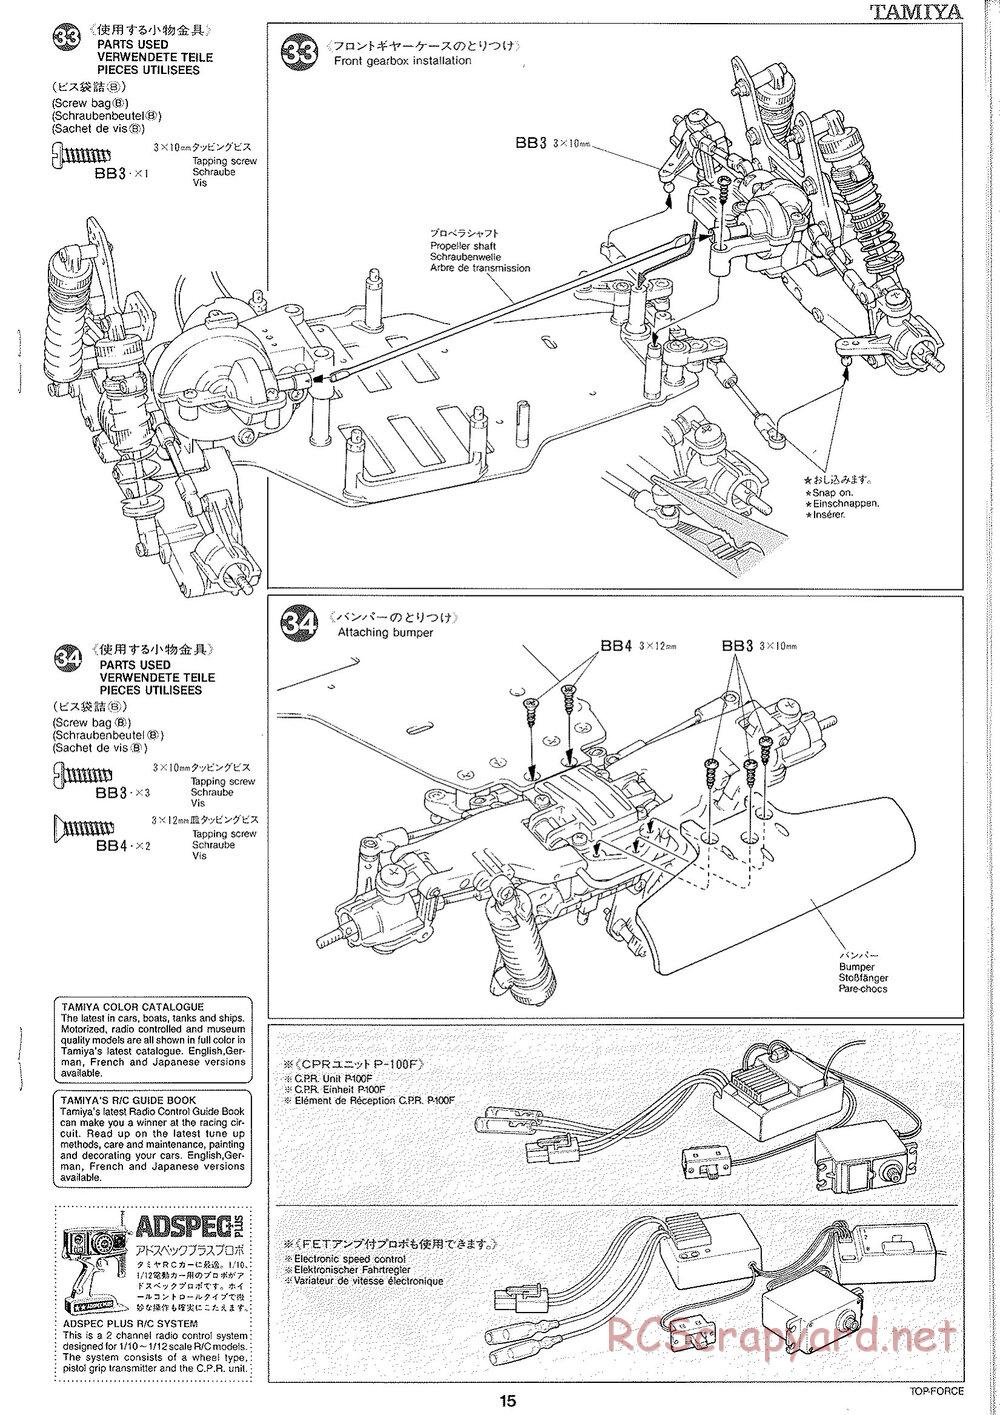 Tamiya - Top Force 2005 - DF-01 Chassis - Manual - Page 15